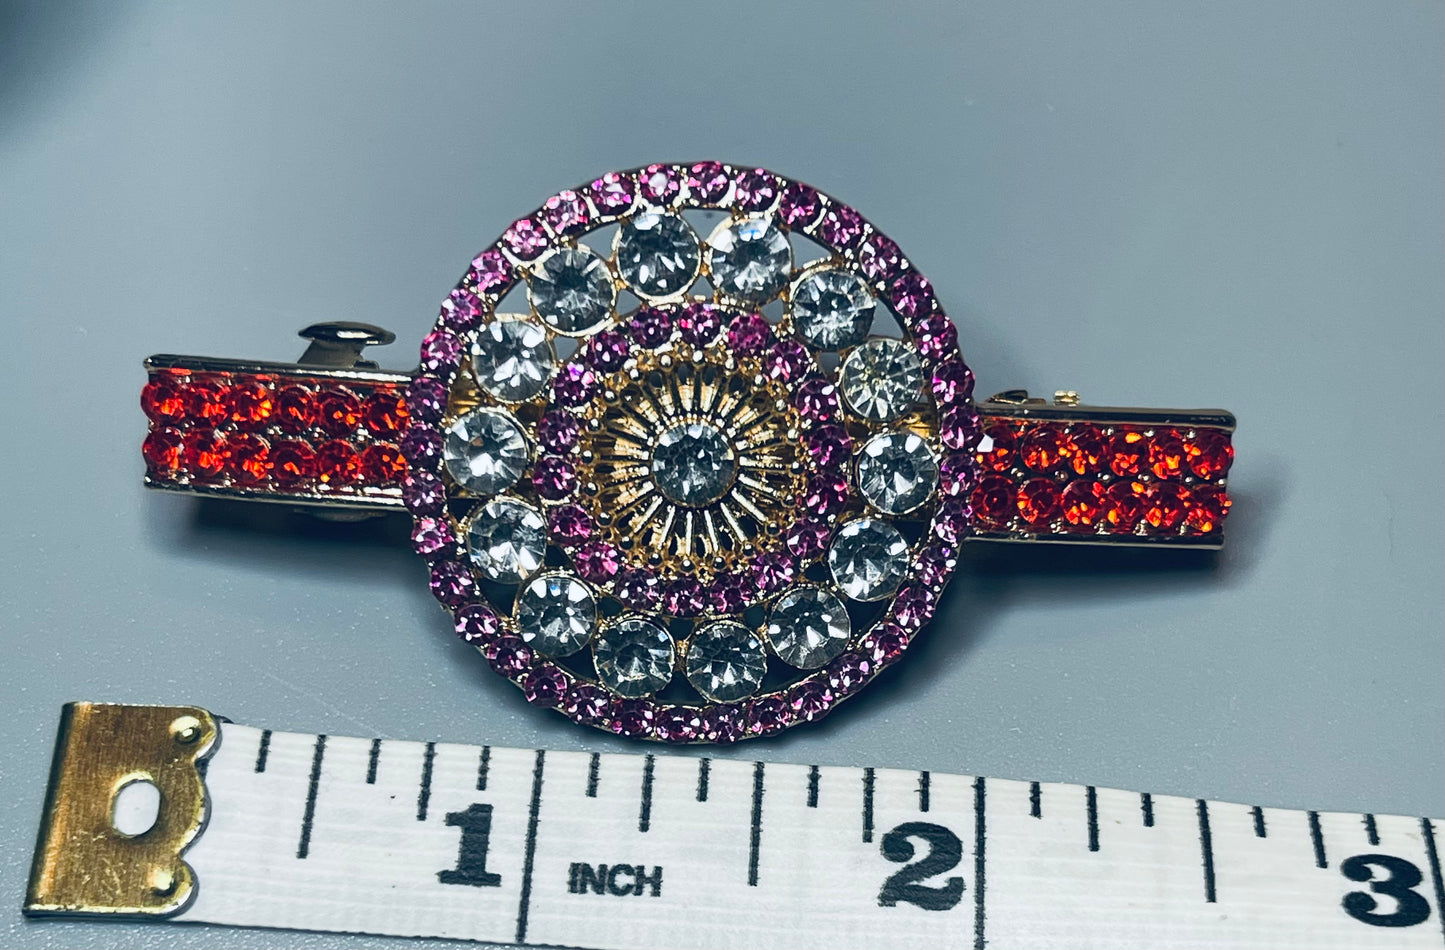 Red pink Crystal round rhinestone barrette approximately 3.0” gold tone formal hair accessories gift wedding bridesmaid prom birthday mother of bride groom